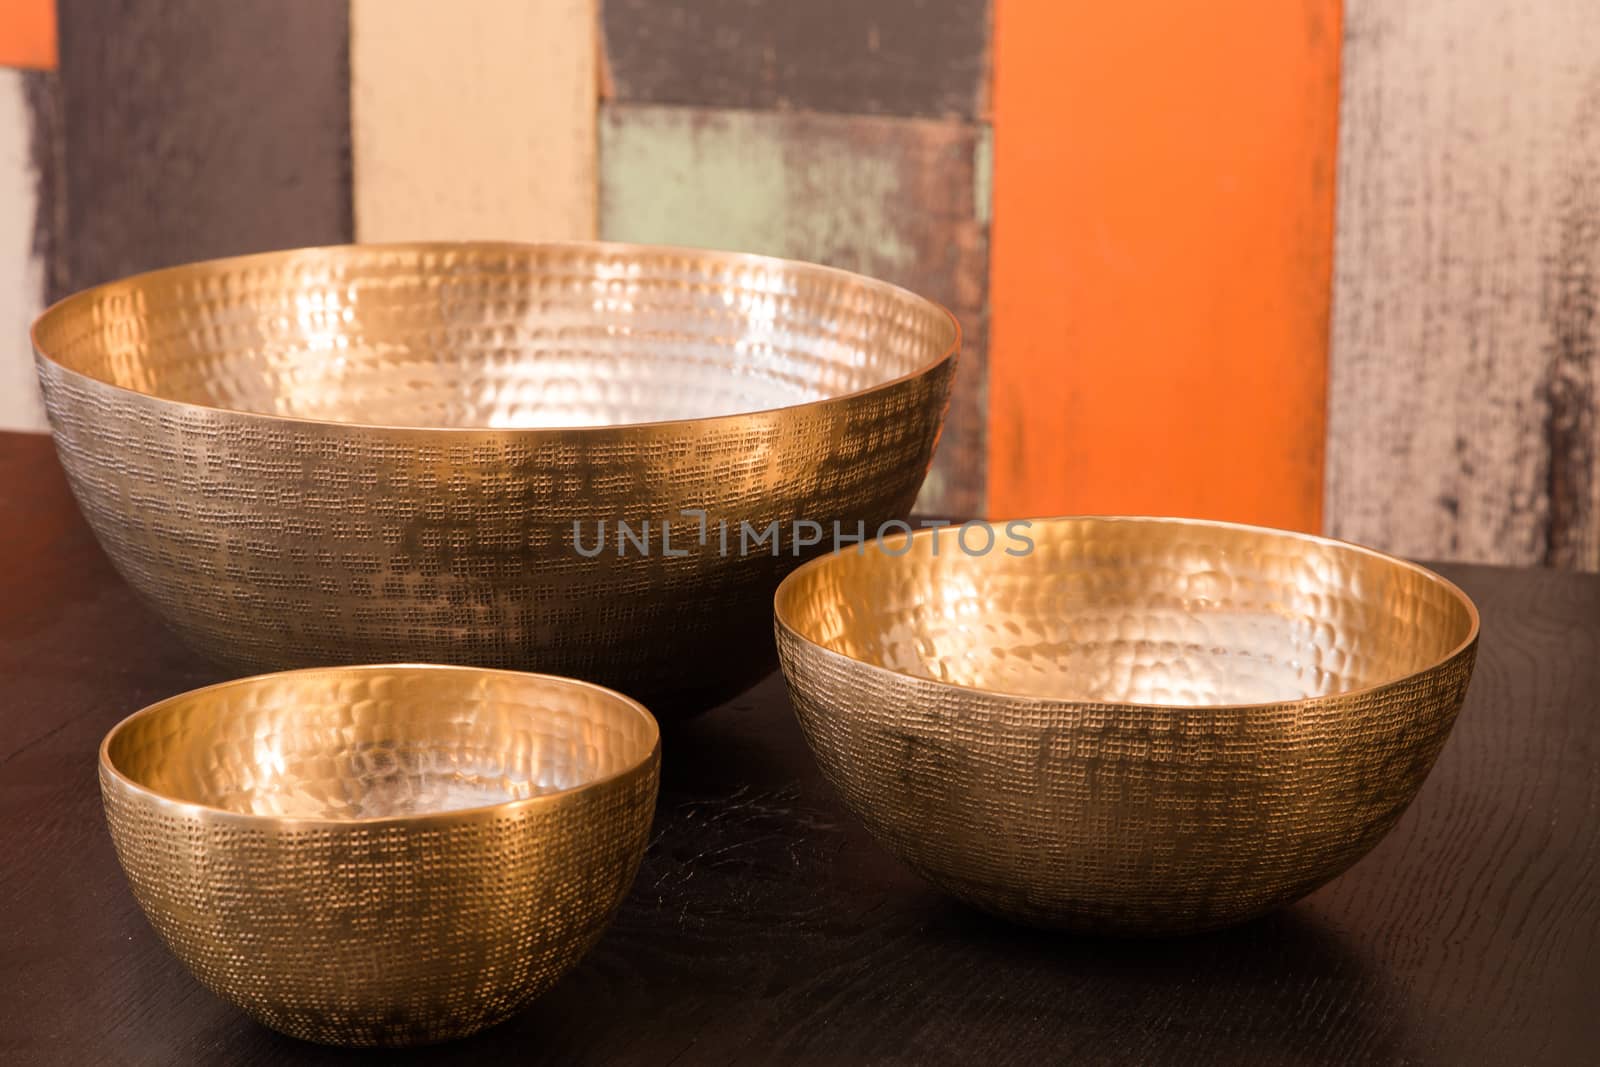 Decorated metal bowls by Kartouchken